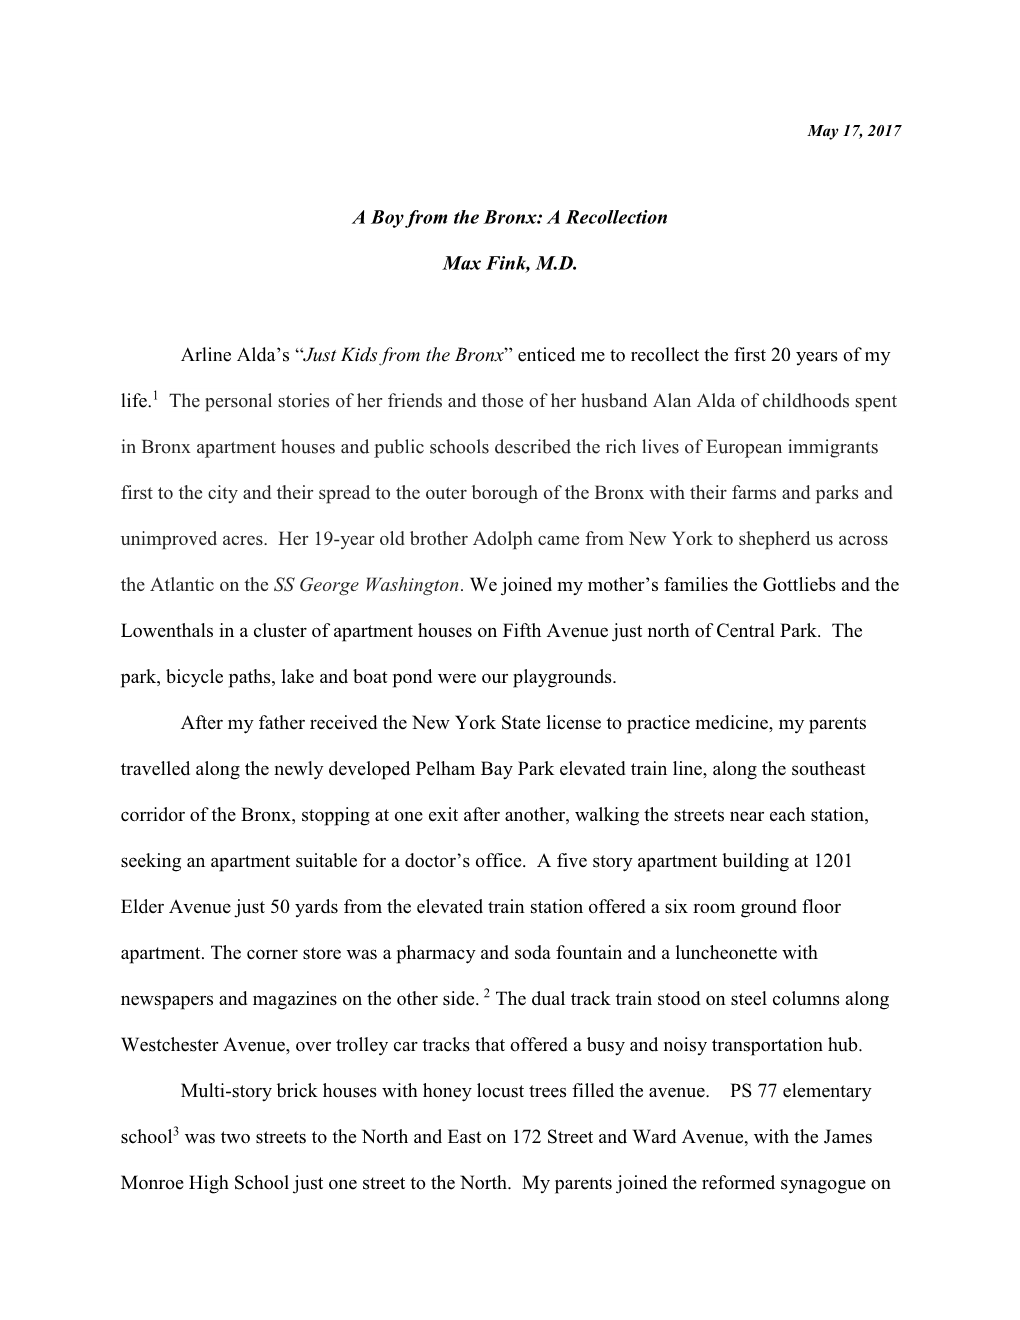 A Boy from the Bronx: a Recollection Max Fink, M.D. Arline Alda's “Just